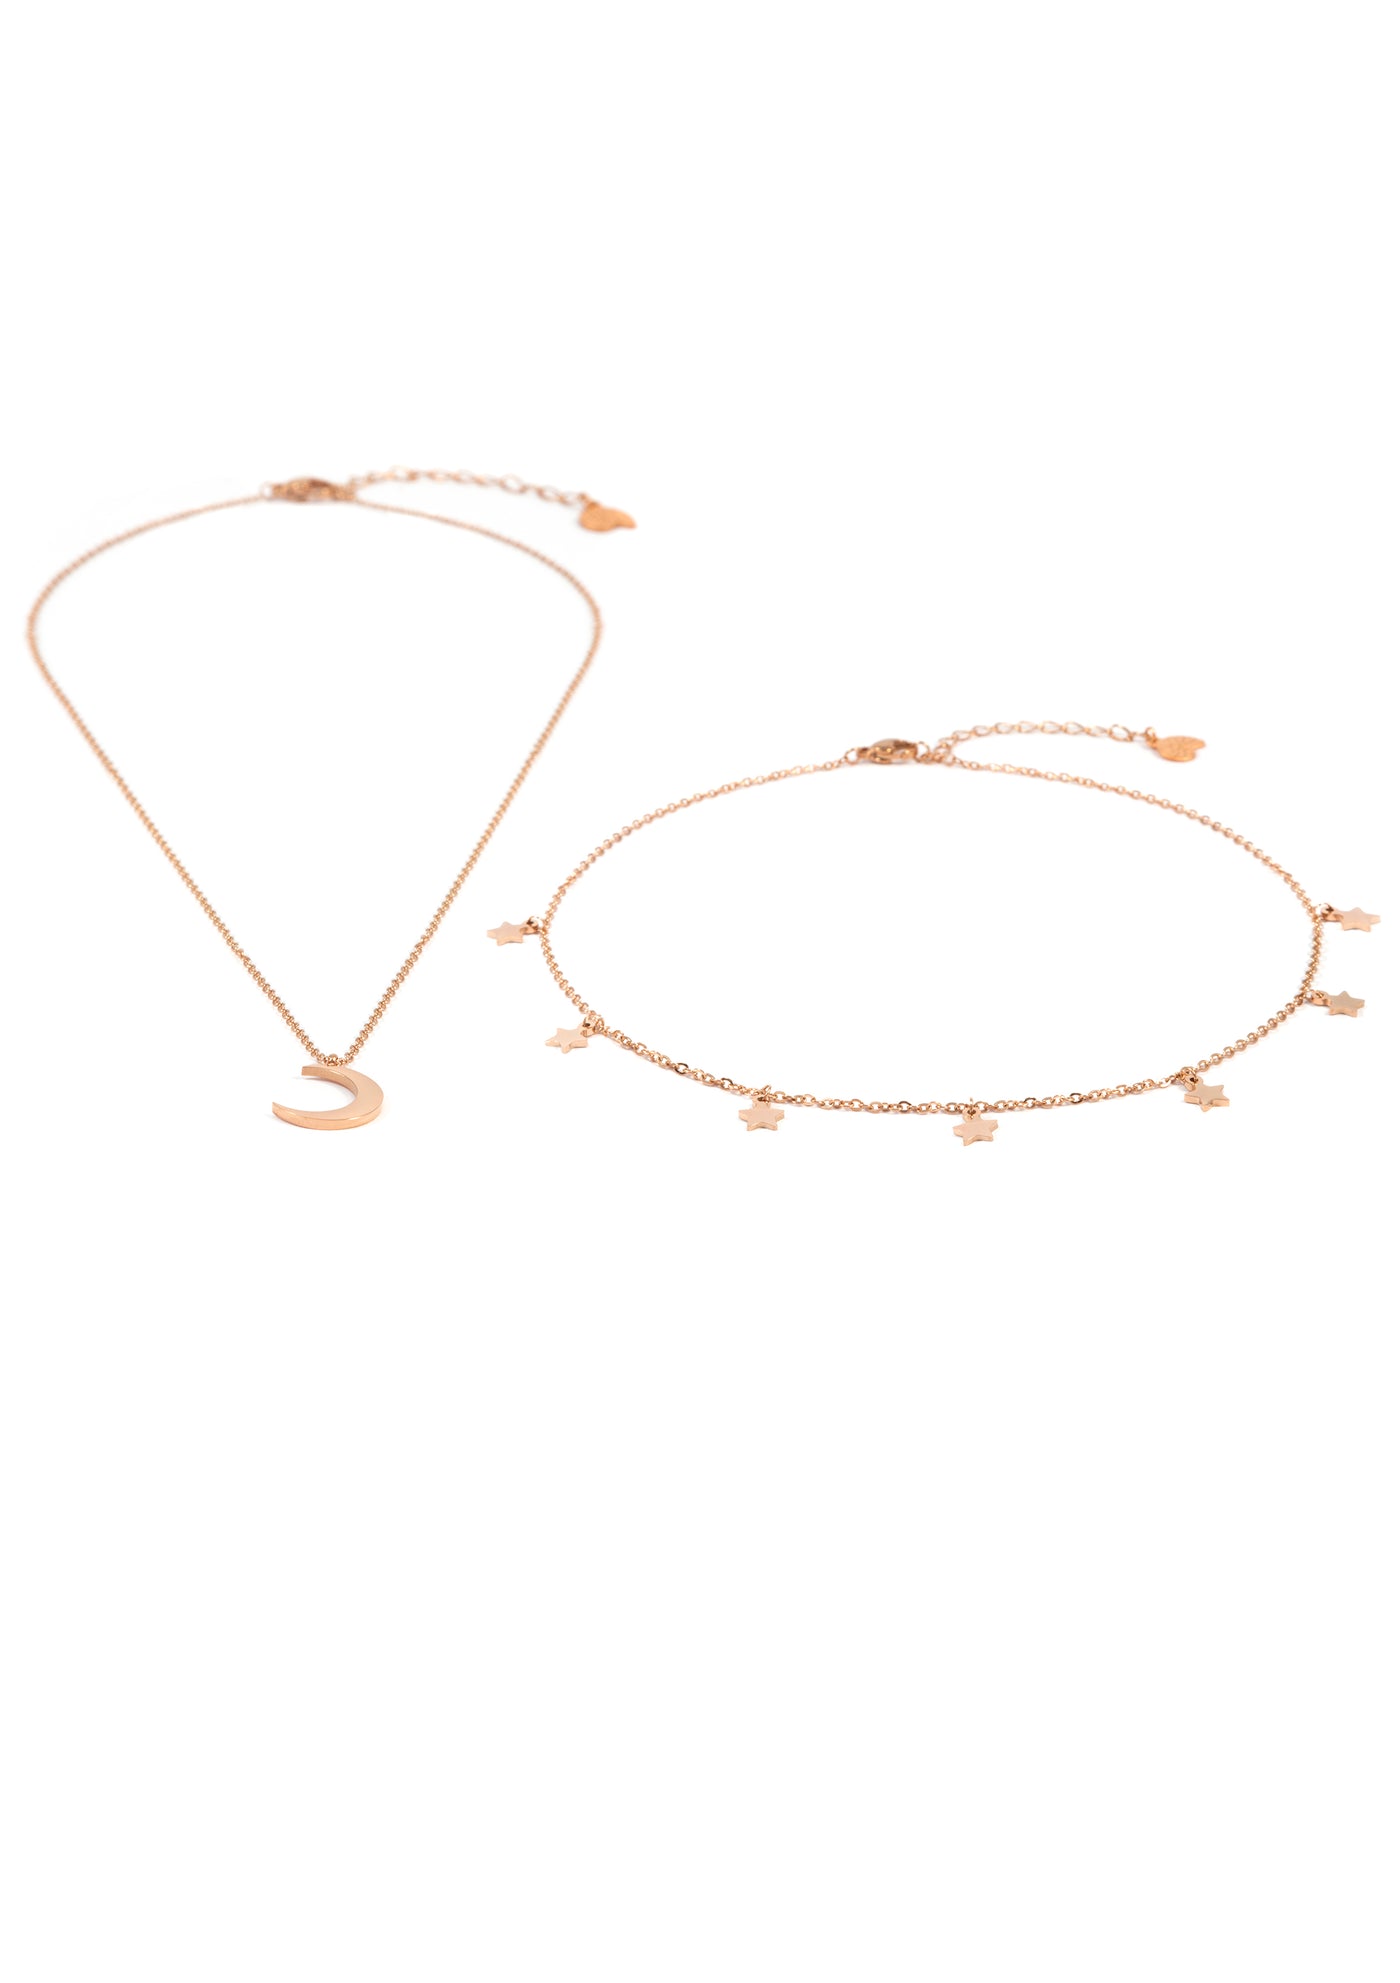 Star Choker Moon Necklace Jewelry Set Rose Gold